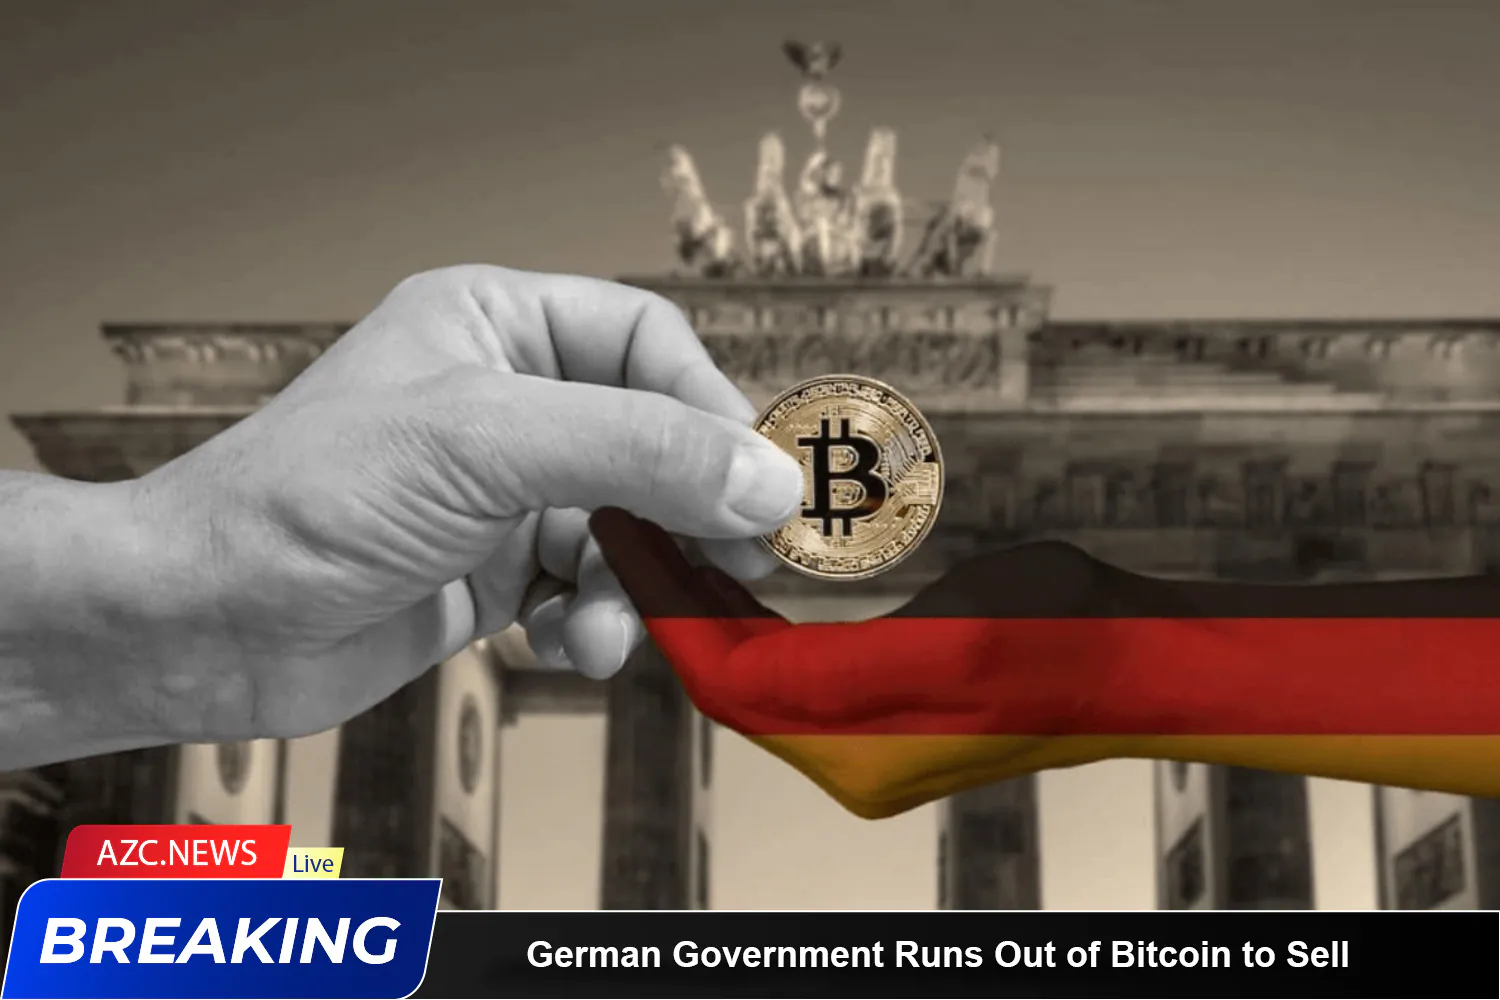 Bitcoin Price Nears $60k As The German Government Runs Out Of Bitcoin To Sell